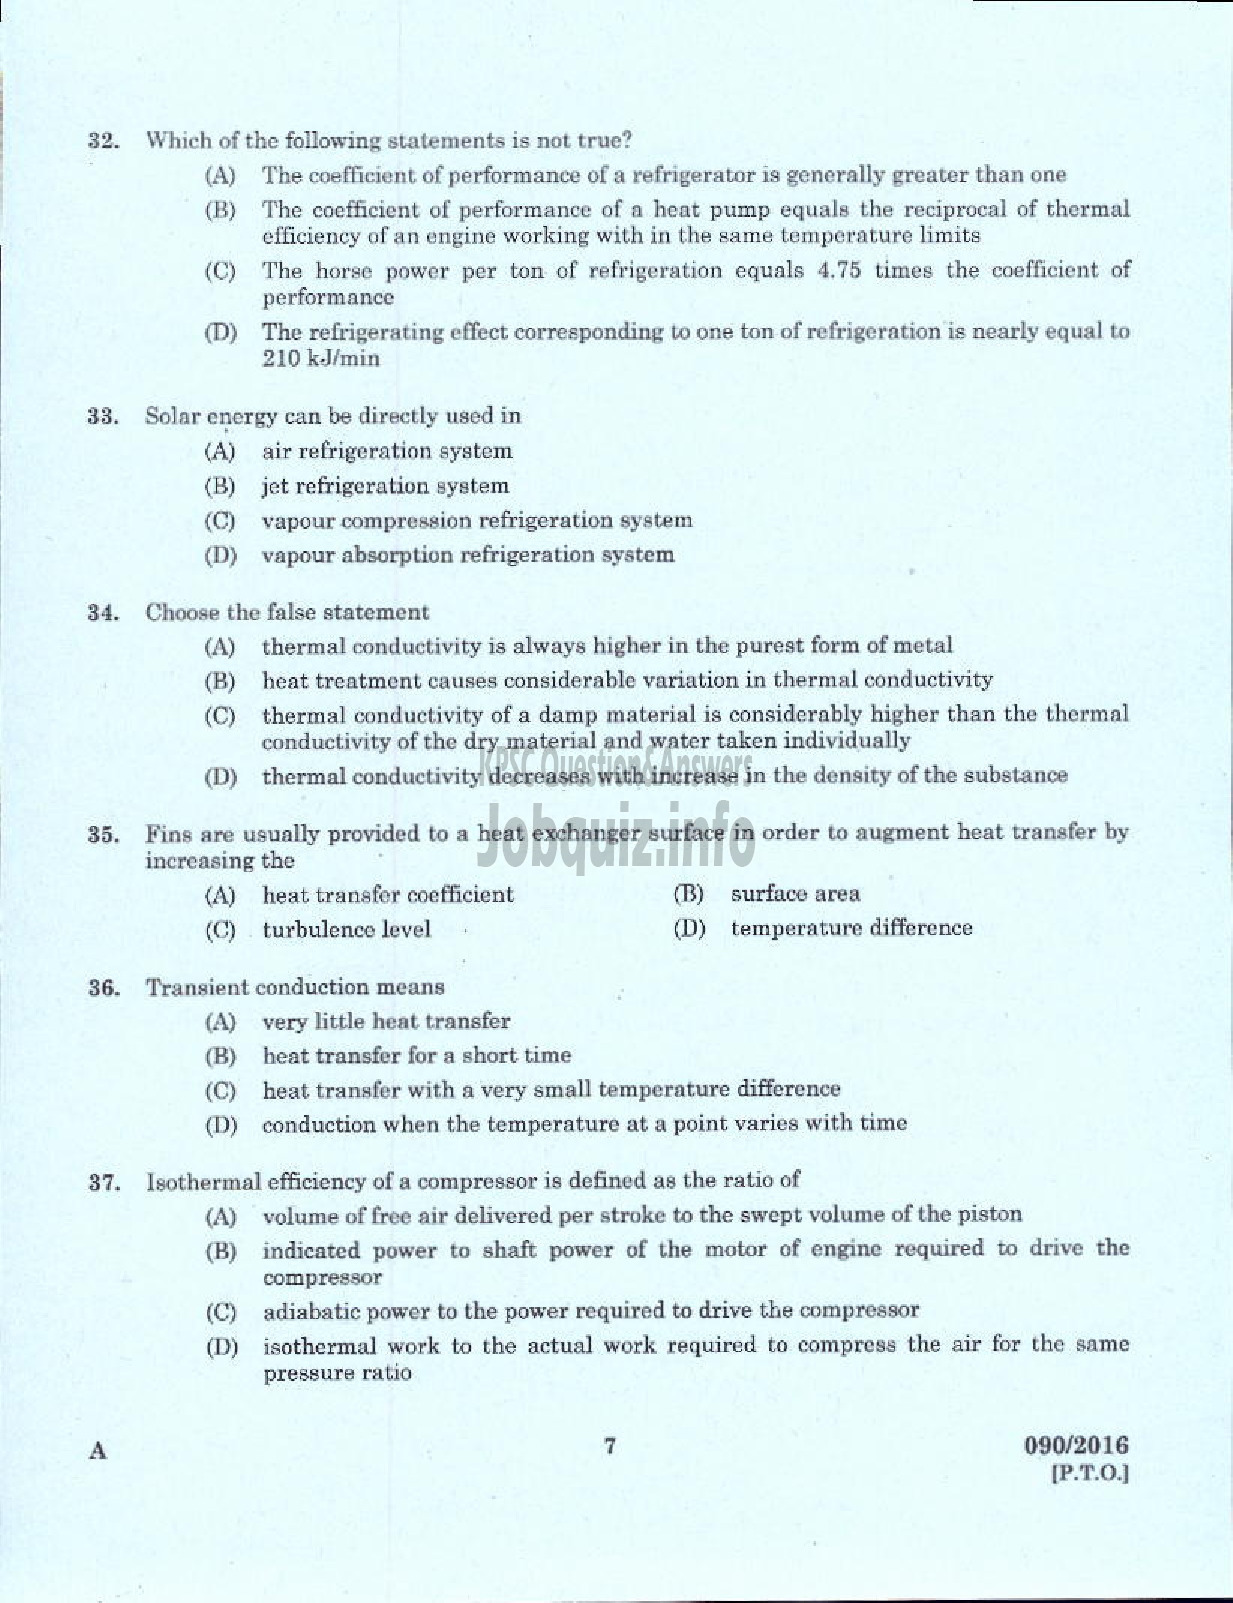 Kerala PSC Question Paper - VOCATIONAL INSTRUCTOR IN REFRIGERATION AND AIR CONDITIONING VHSE-5